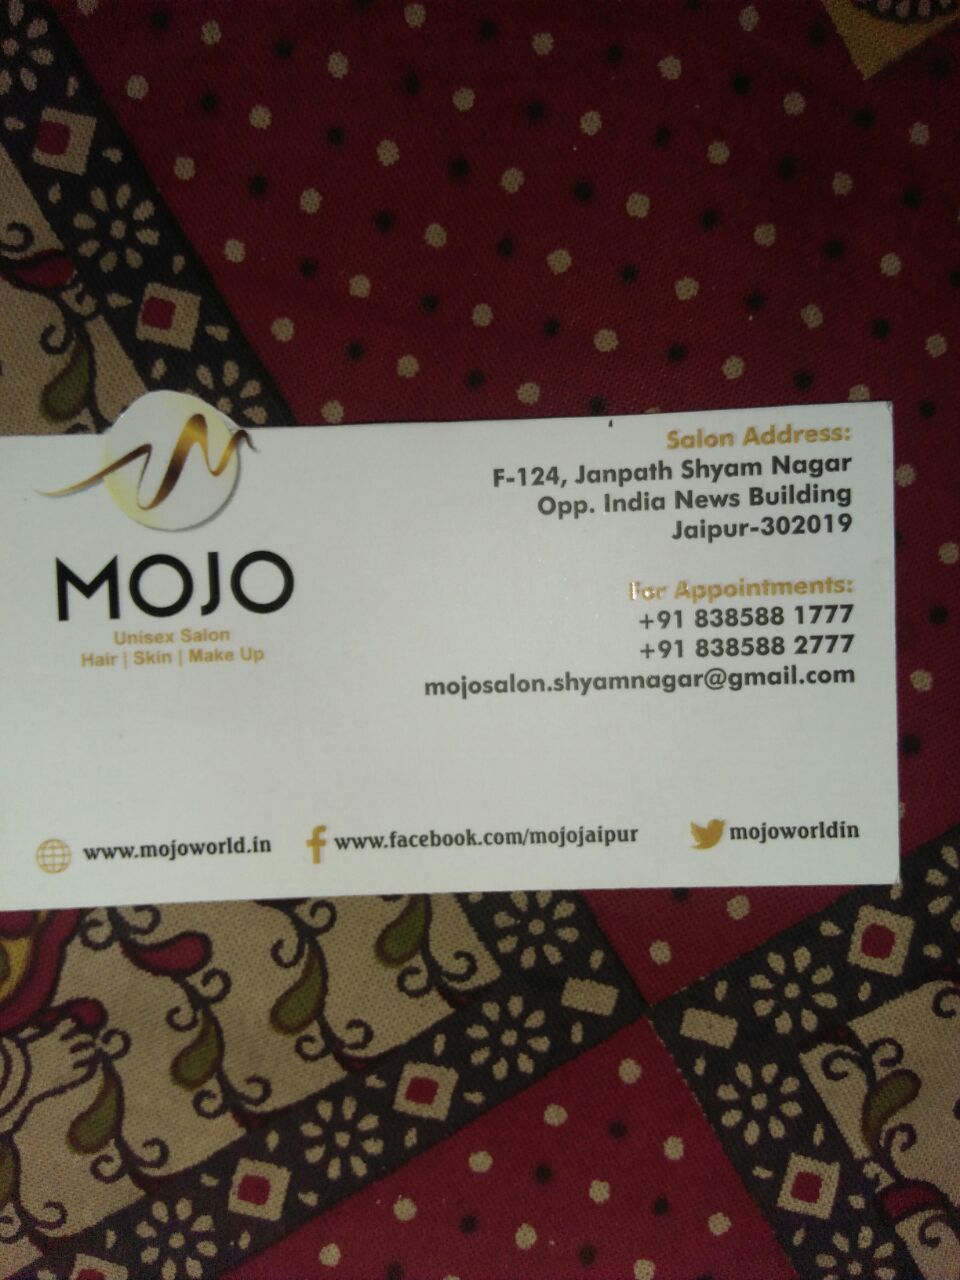   Mojo Unisex salon from f-124, janpath, shyam nagar opp. india news bulding  ,Jaipur, Rajasthan, 302019, India 6 years experience in Speciality Spa | Beauty and Salon | Kayawell